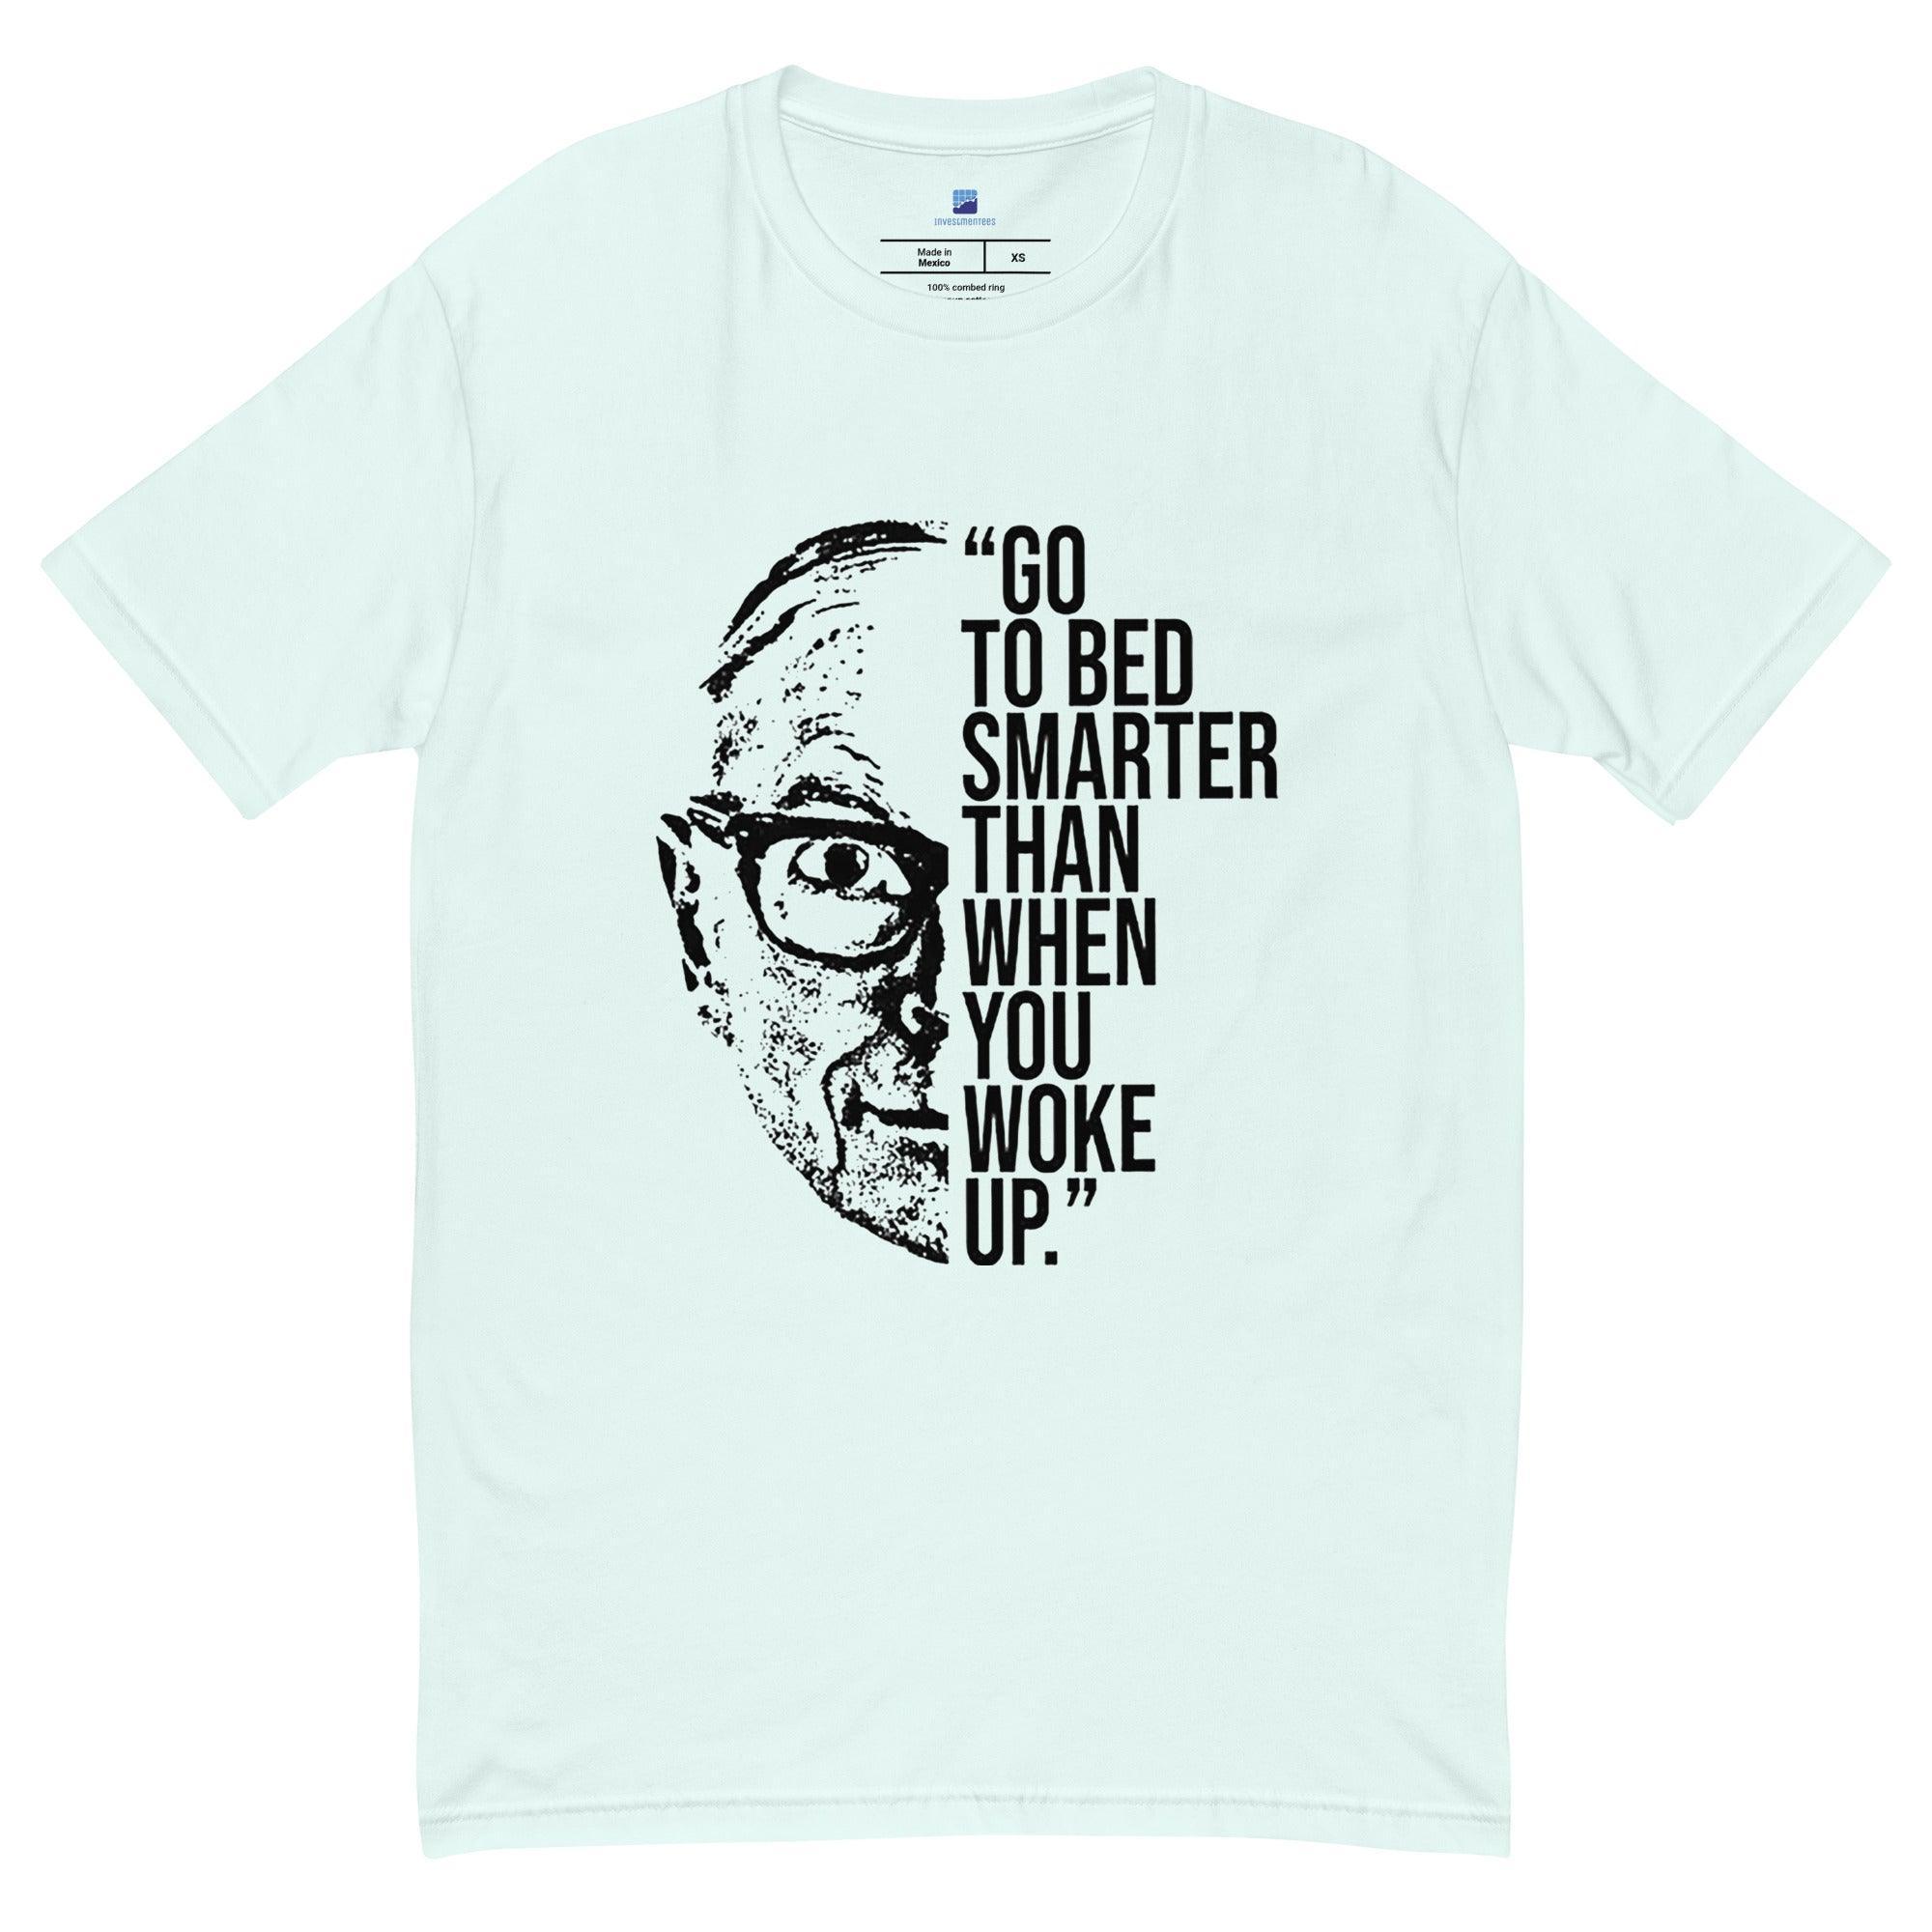 Charlie Munger Wise Words T-Shirt - InvestmenTees